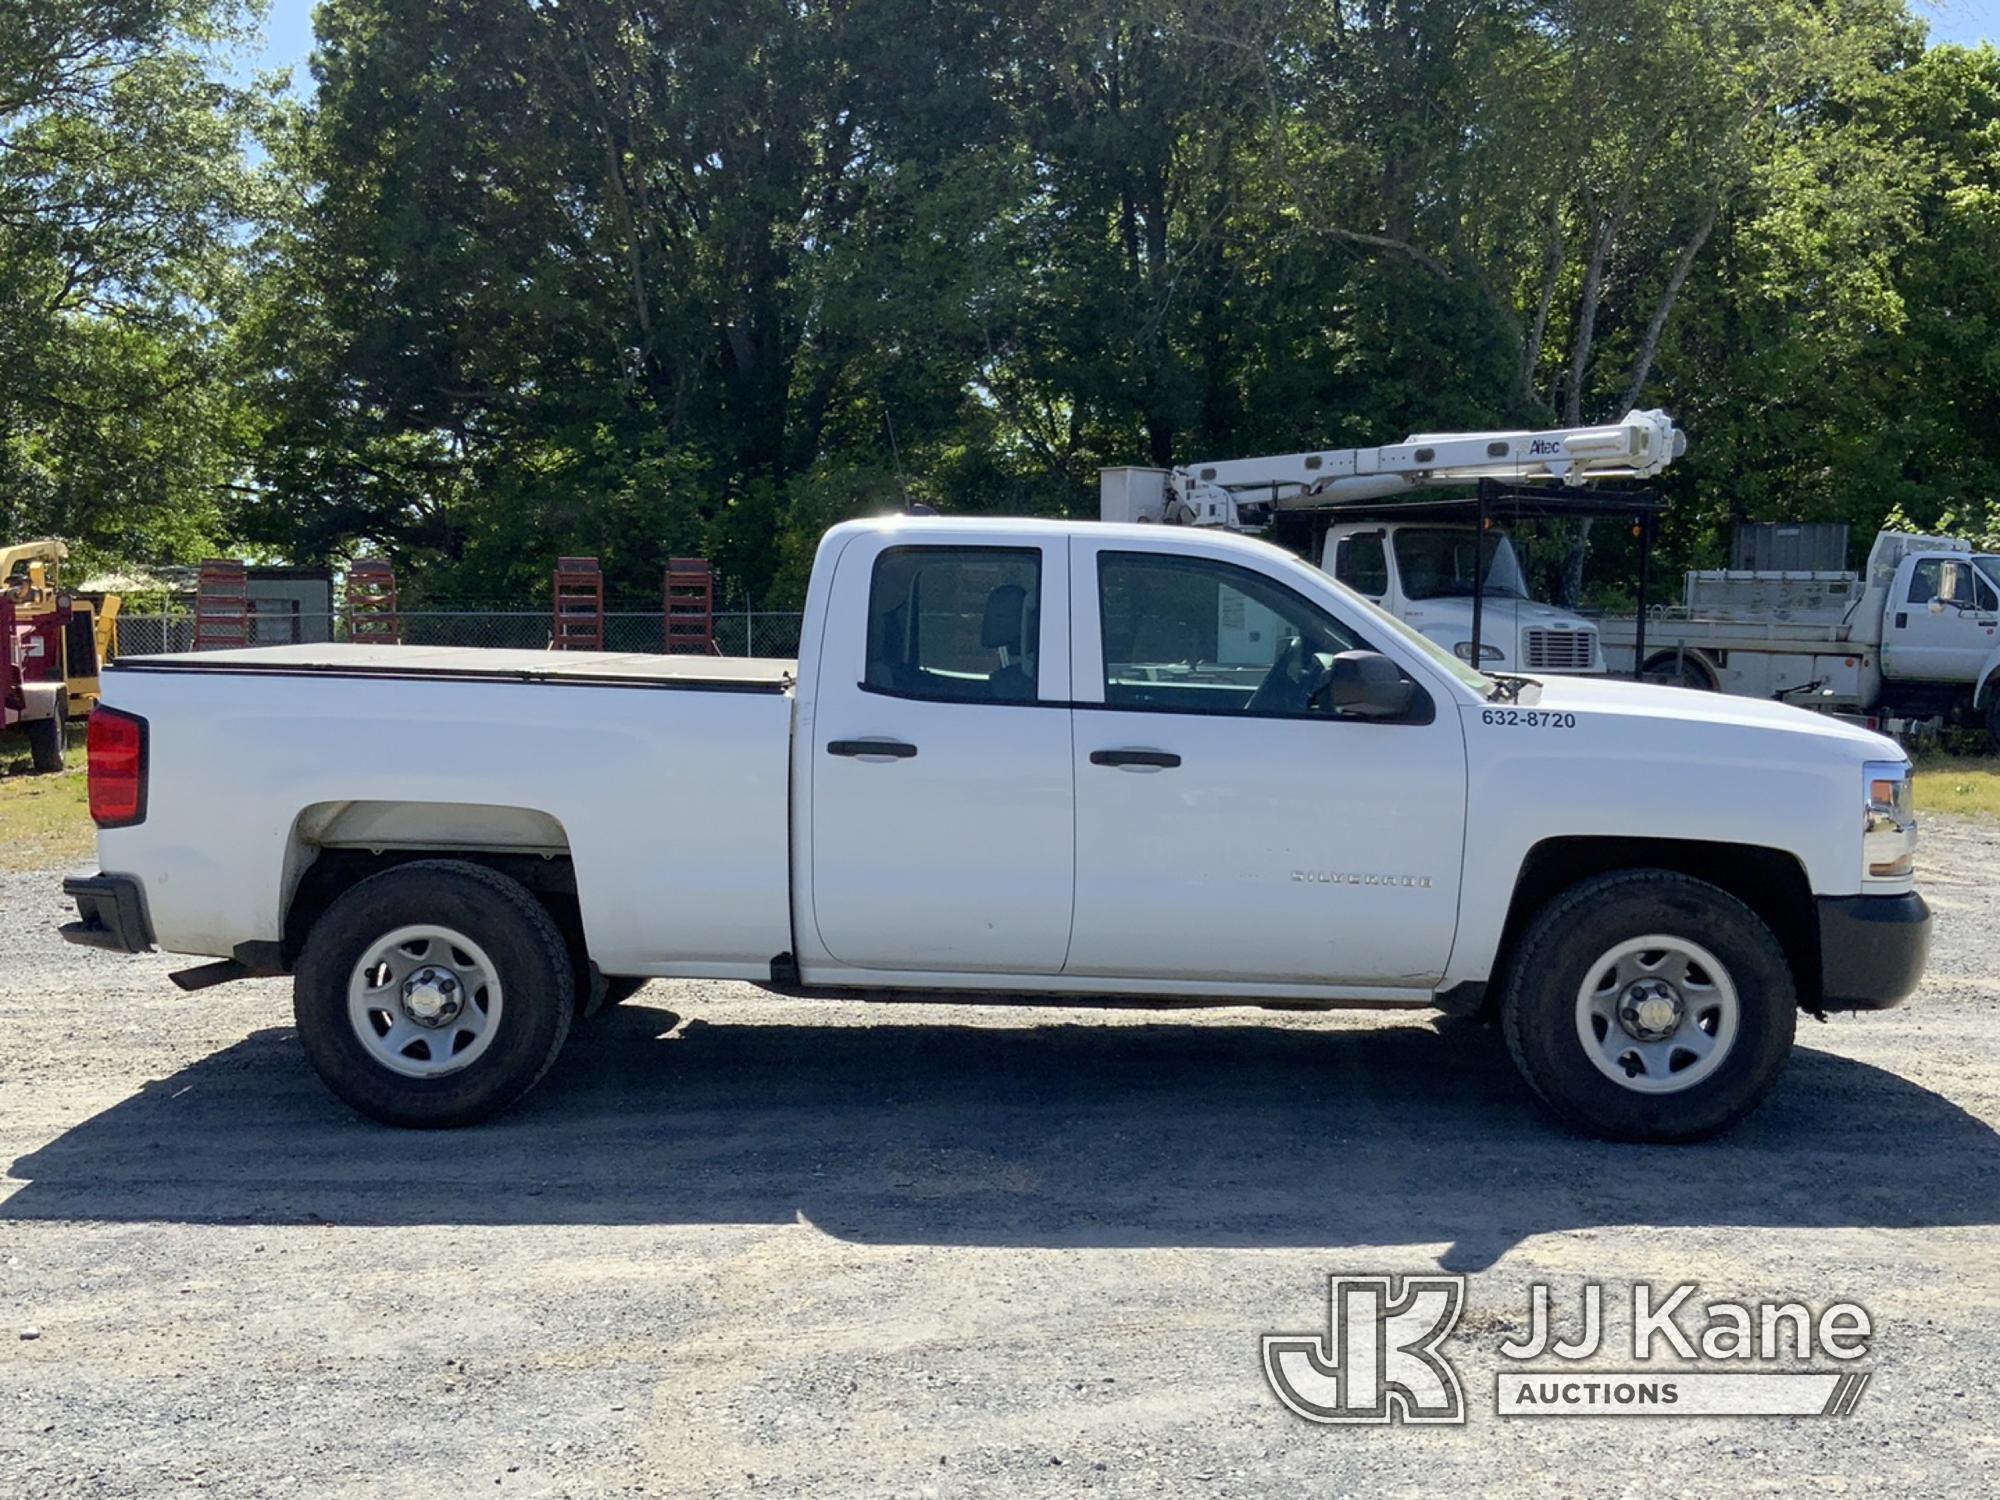 (Shelby, NC) 2018 Chevrolet Silverado 1500 4x4 Extended-Cab Pickup Truck Not Running, Turns Over, Co